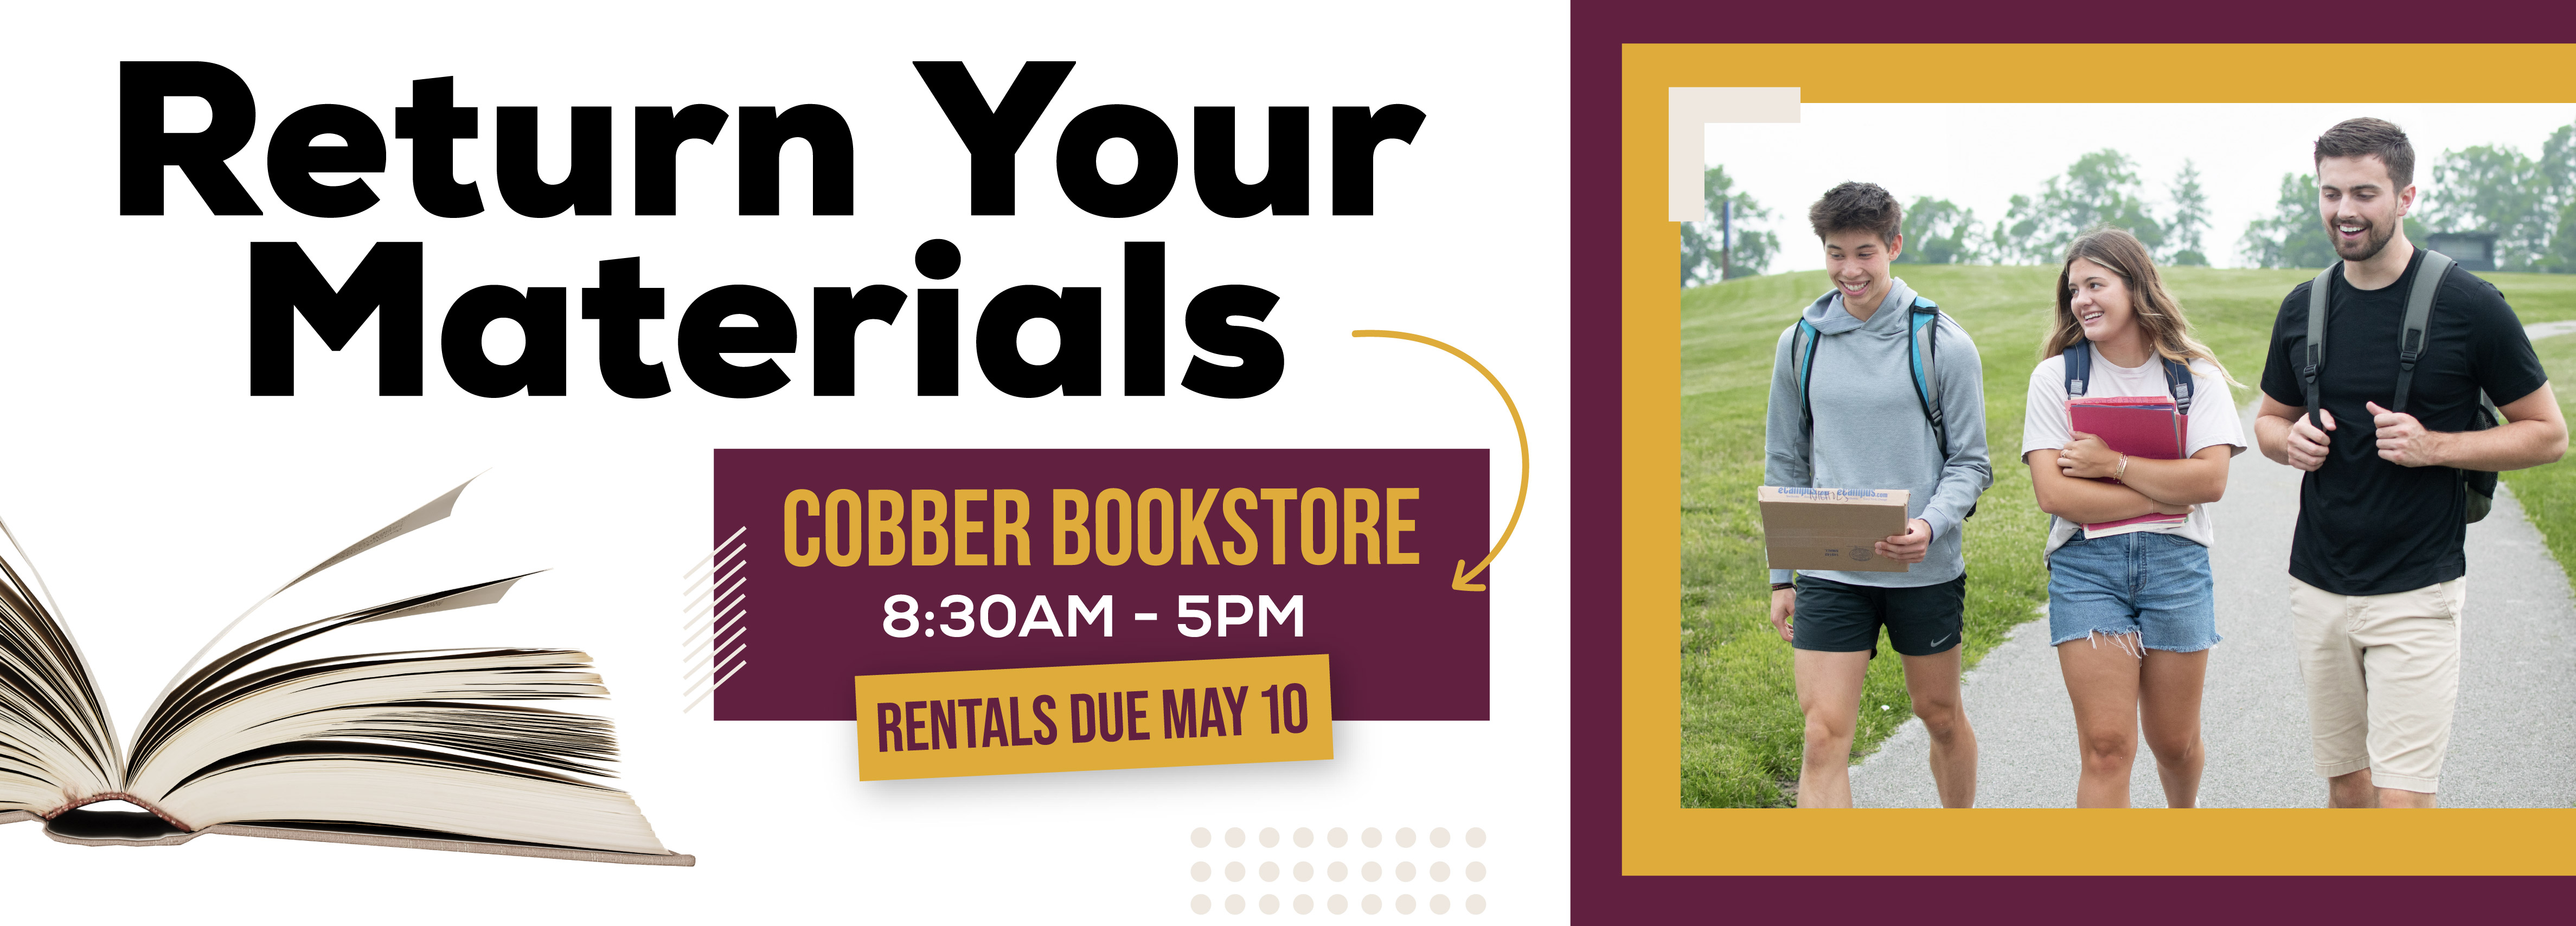 Return Your Materials Cobber Bookstore 8:30AM - 5PM   Rentals Due May 10